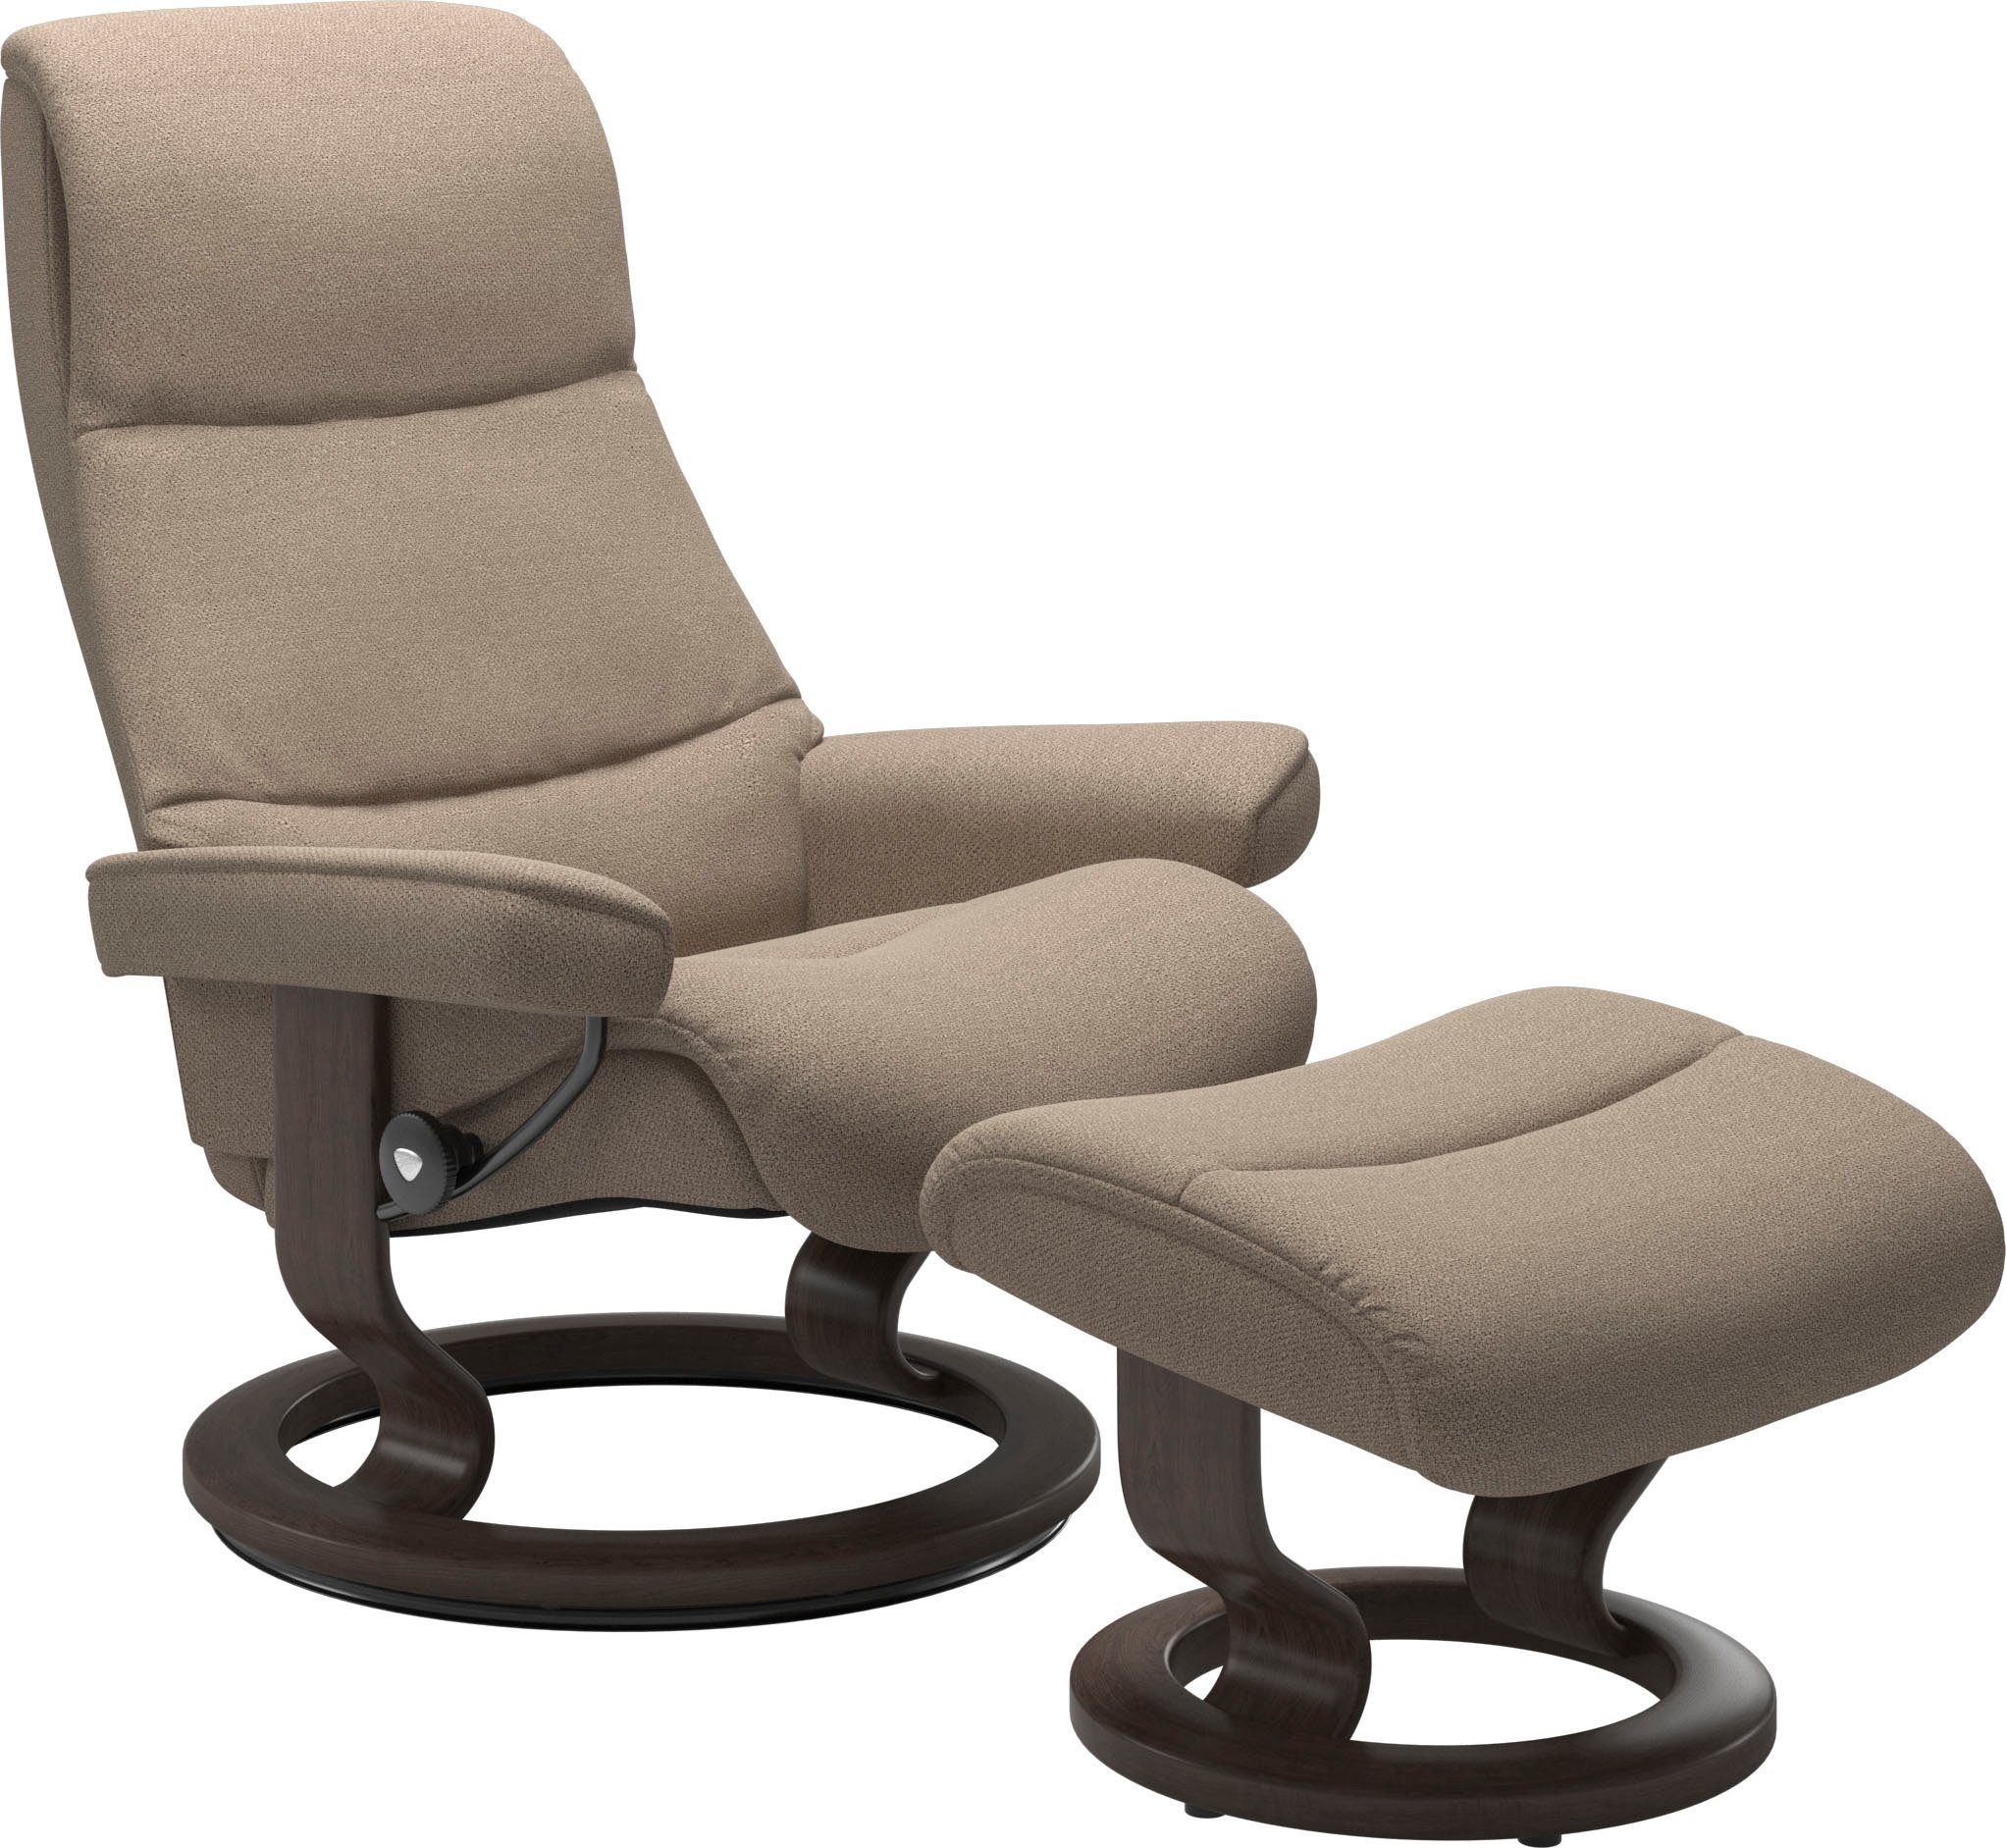 mit View, Größe Base, Relaxsessel Wenge Stressless® Classic L,Gestell